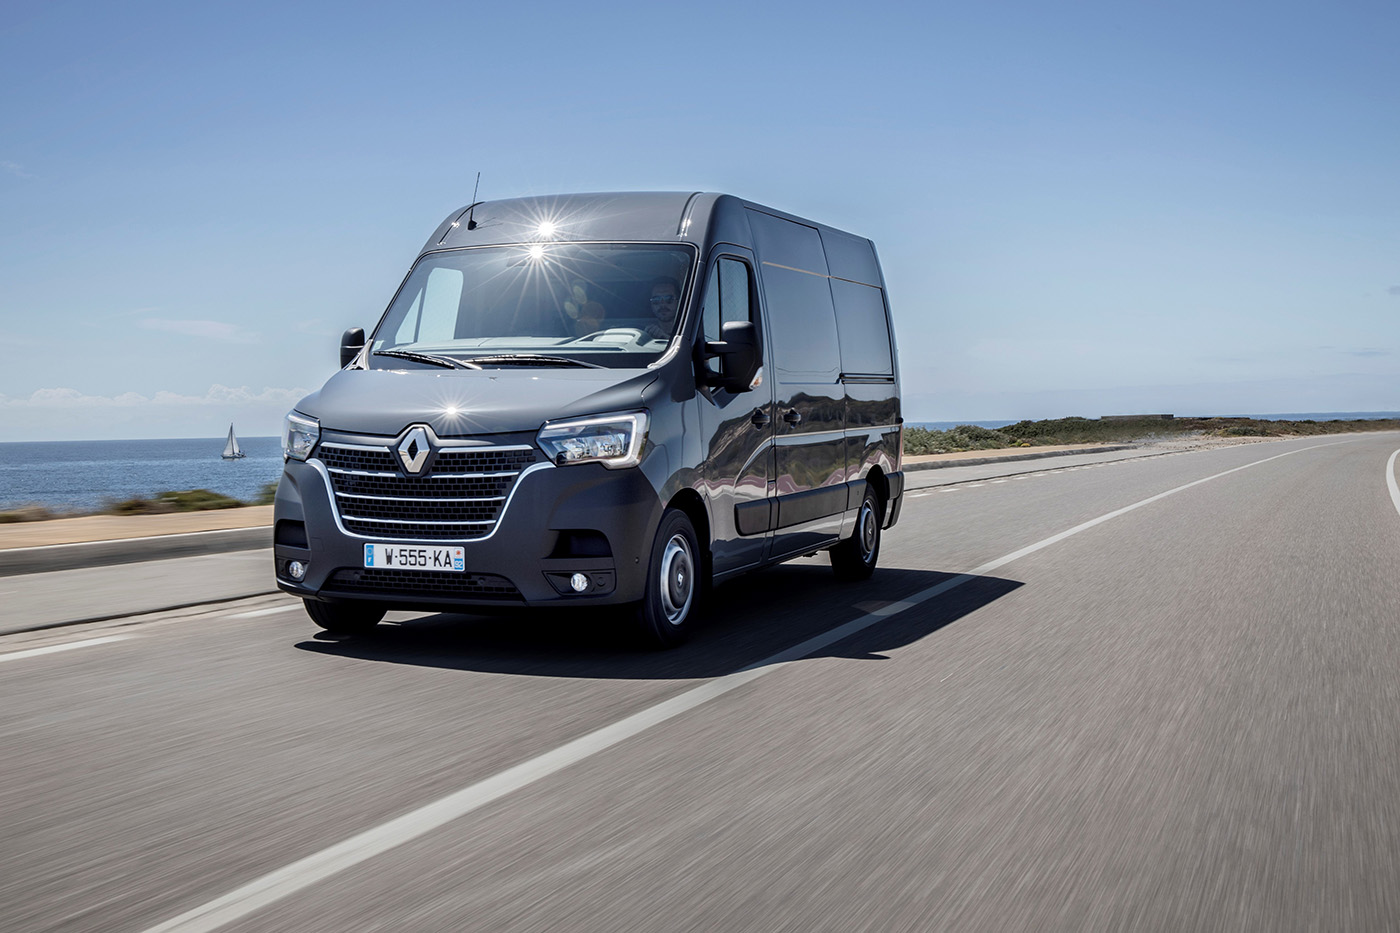 New Renault Master enhanced design, power and driver